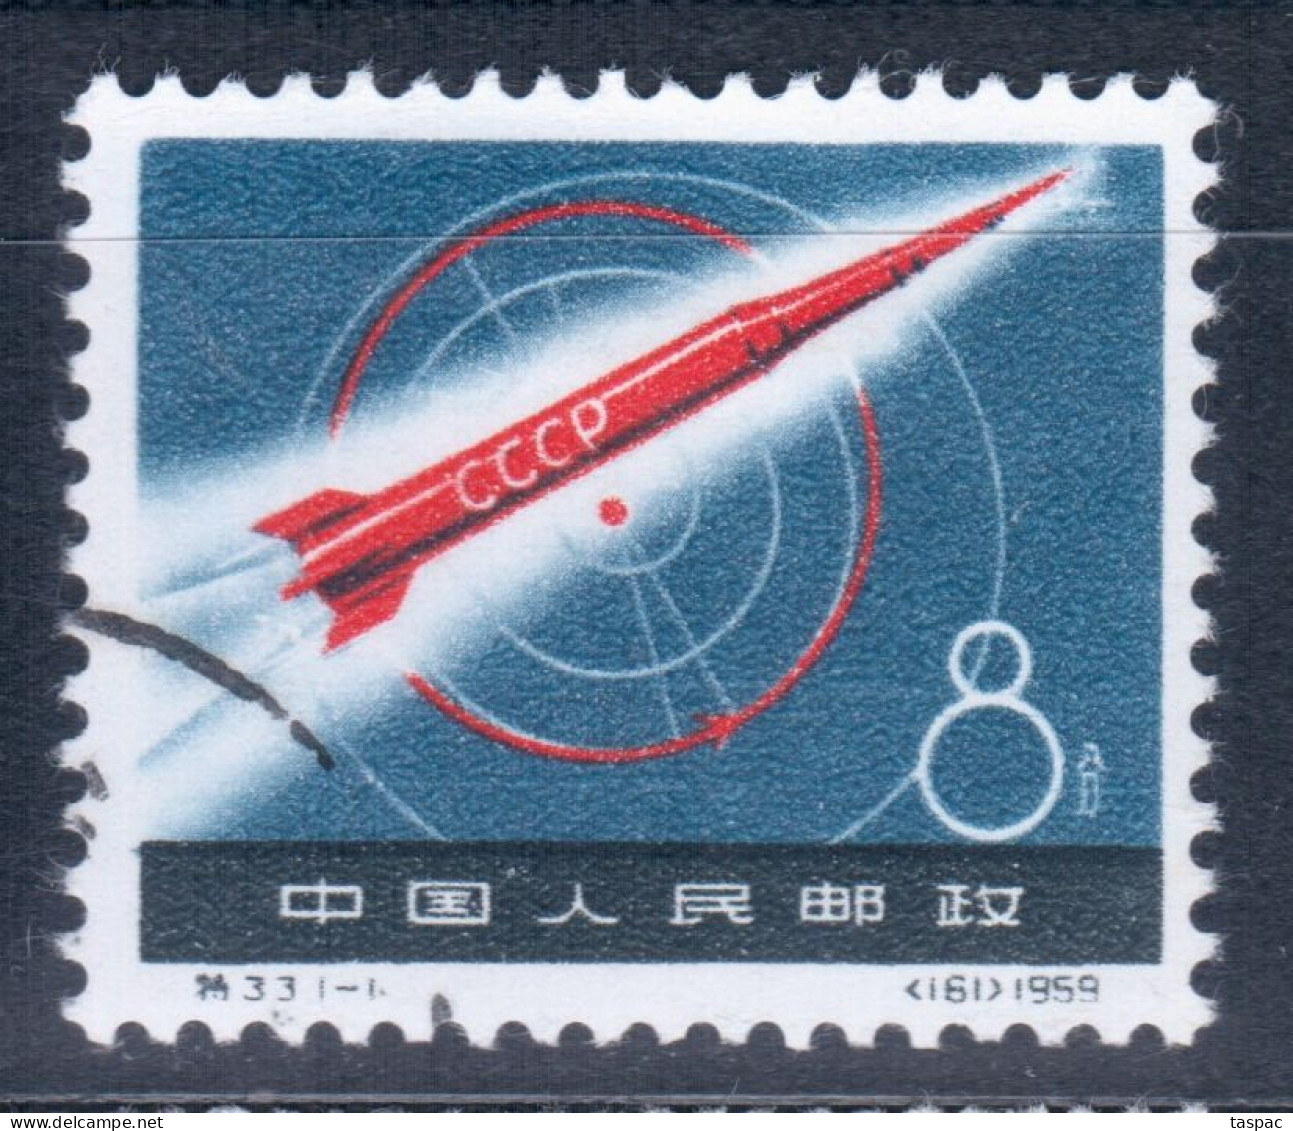 China P.R. 1959 Mi# 453 Used - Launching Of First Russian Space Rocket - Usati